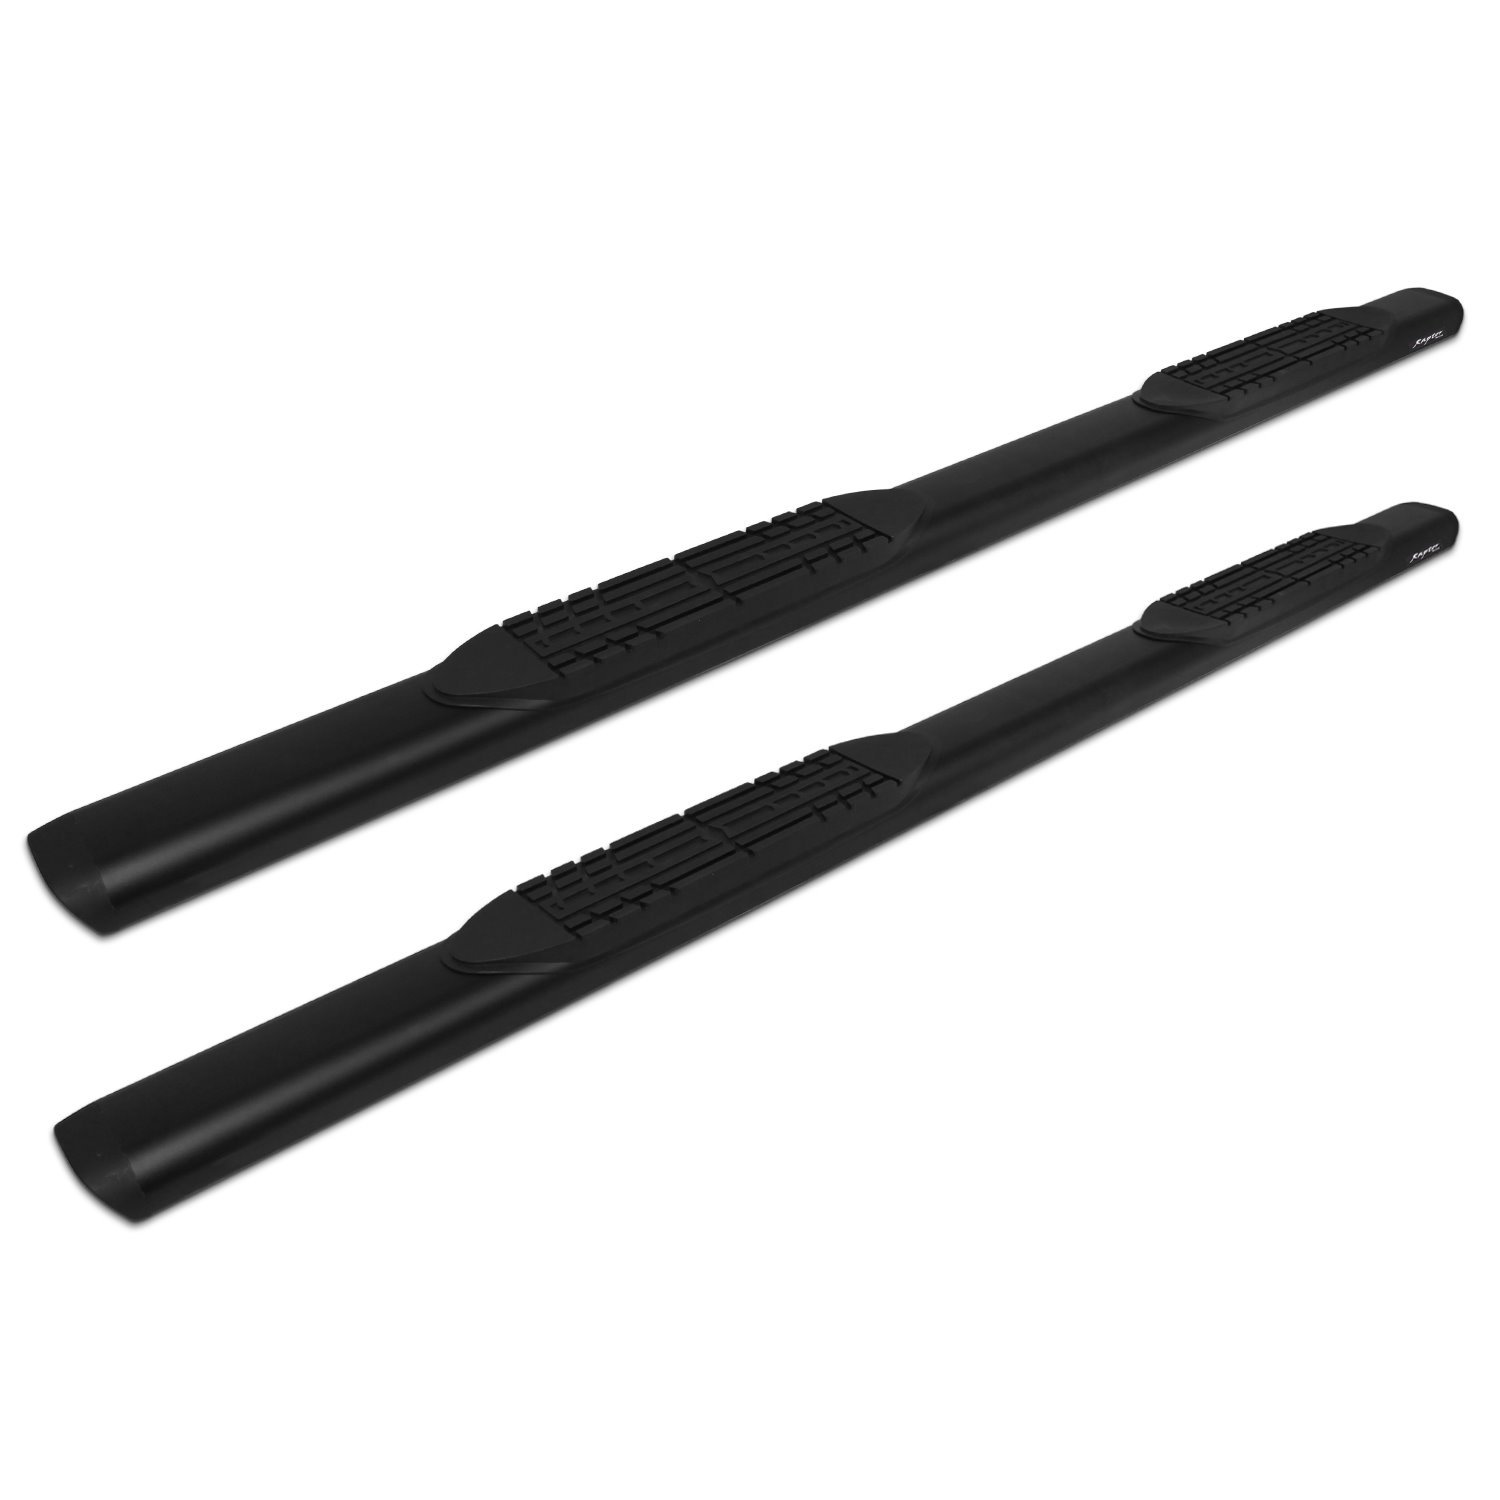 2004-0133BT 5 in Oval Style Slide Track Running Boards, Black Aluminum, Fits Select Toyota Tundra Double Cab